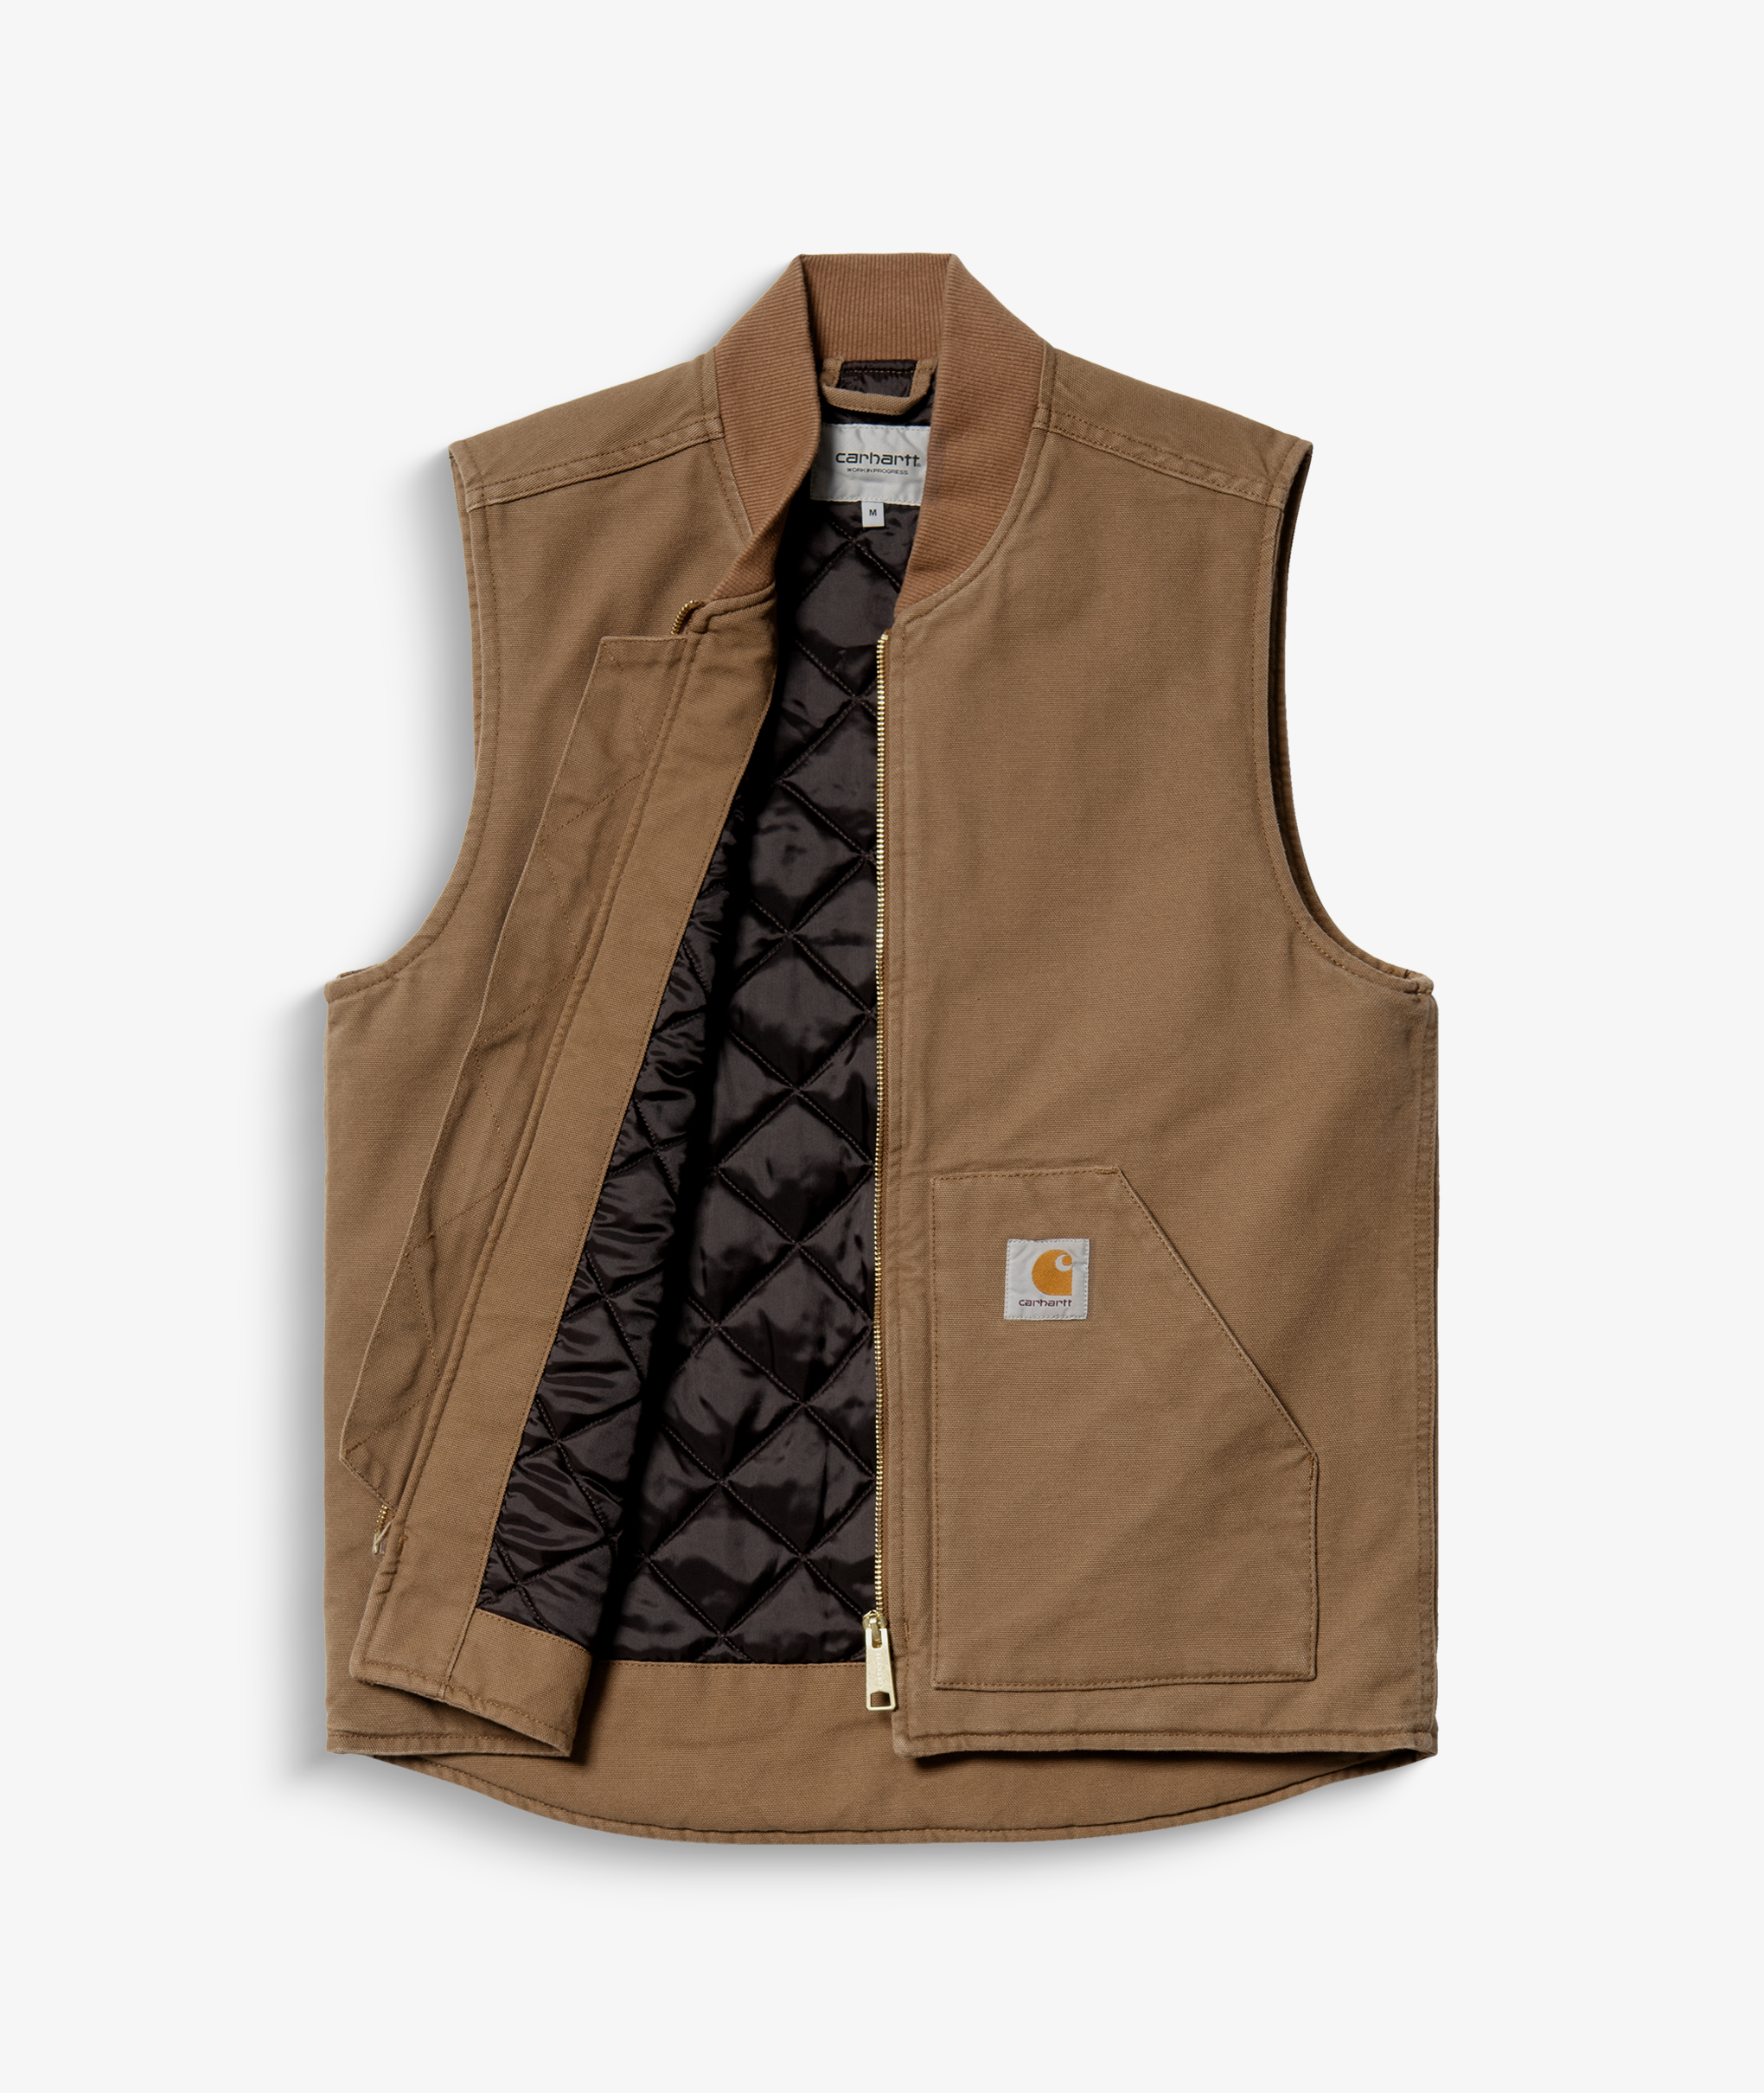 Norse Store | Shipping Worldwide - Carhartt Classic Vest 